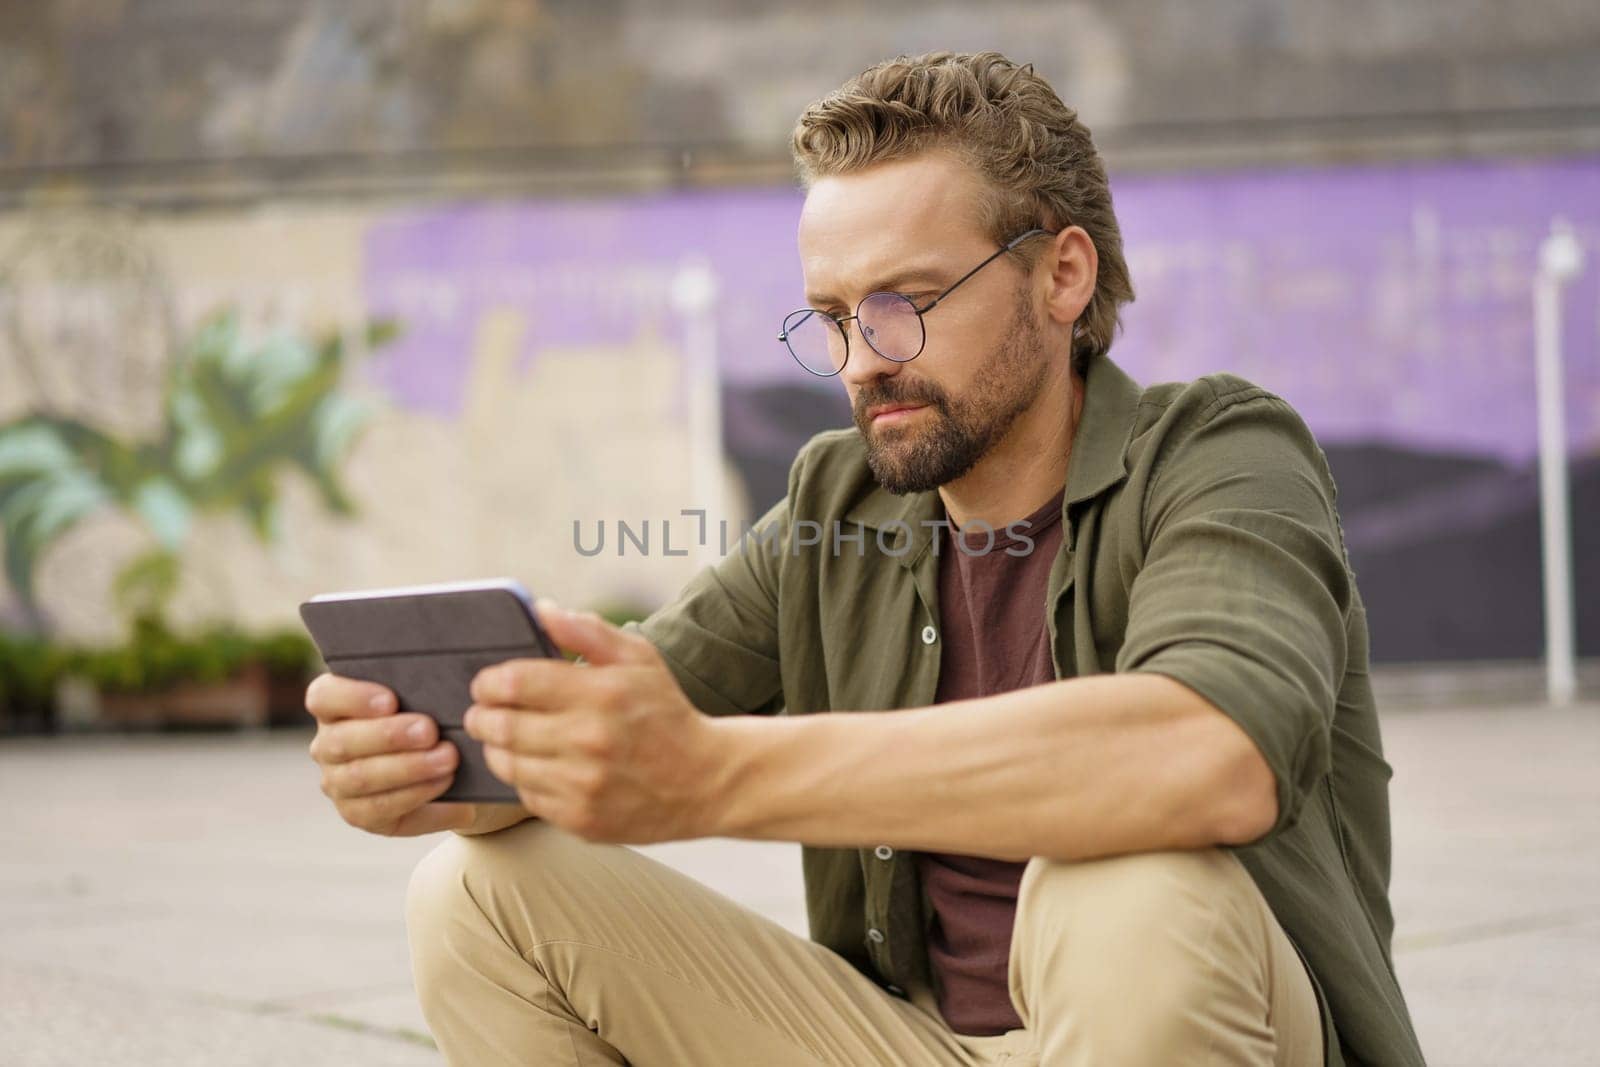 Mid-aged man engaged in studying from a tablet PC while sitting outdoors. With a focused expression, he utilizes the digital device to access study materials and engage in self-improvement. High quality photo